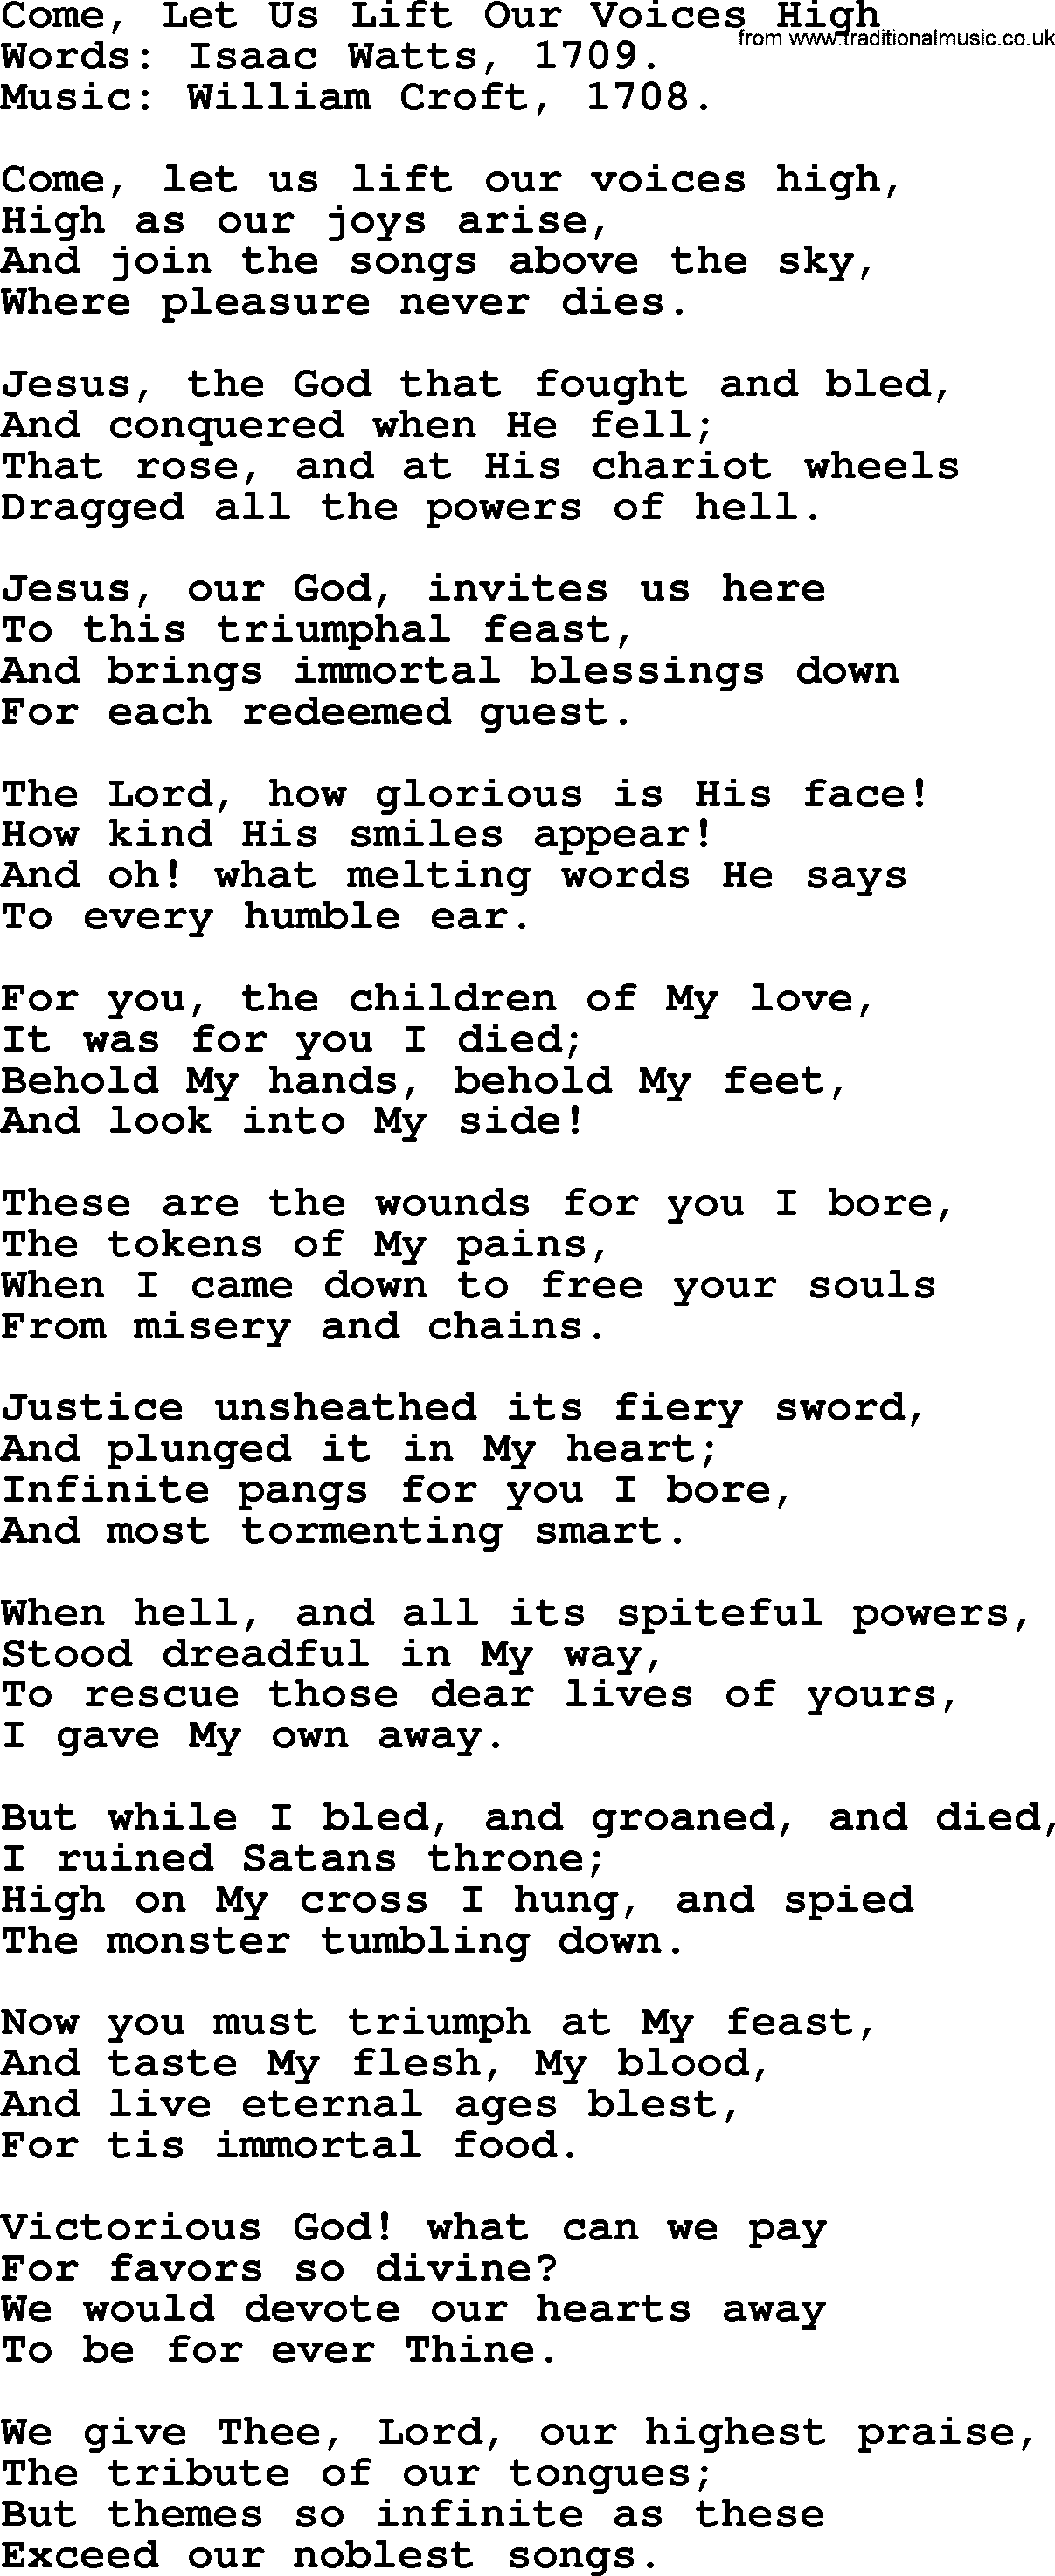 Isaac Watts Christian hymn: Come, Let Us Lift Our Voices High- lyricss